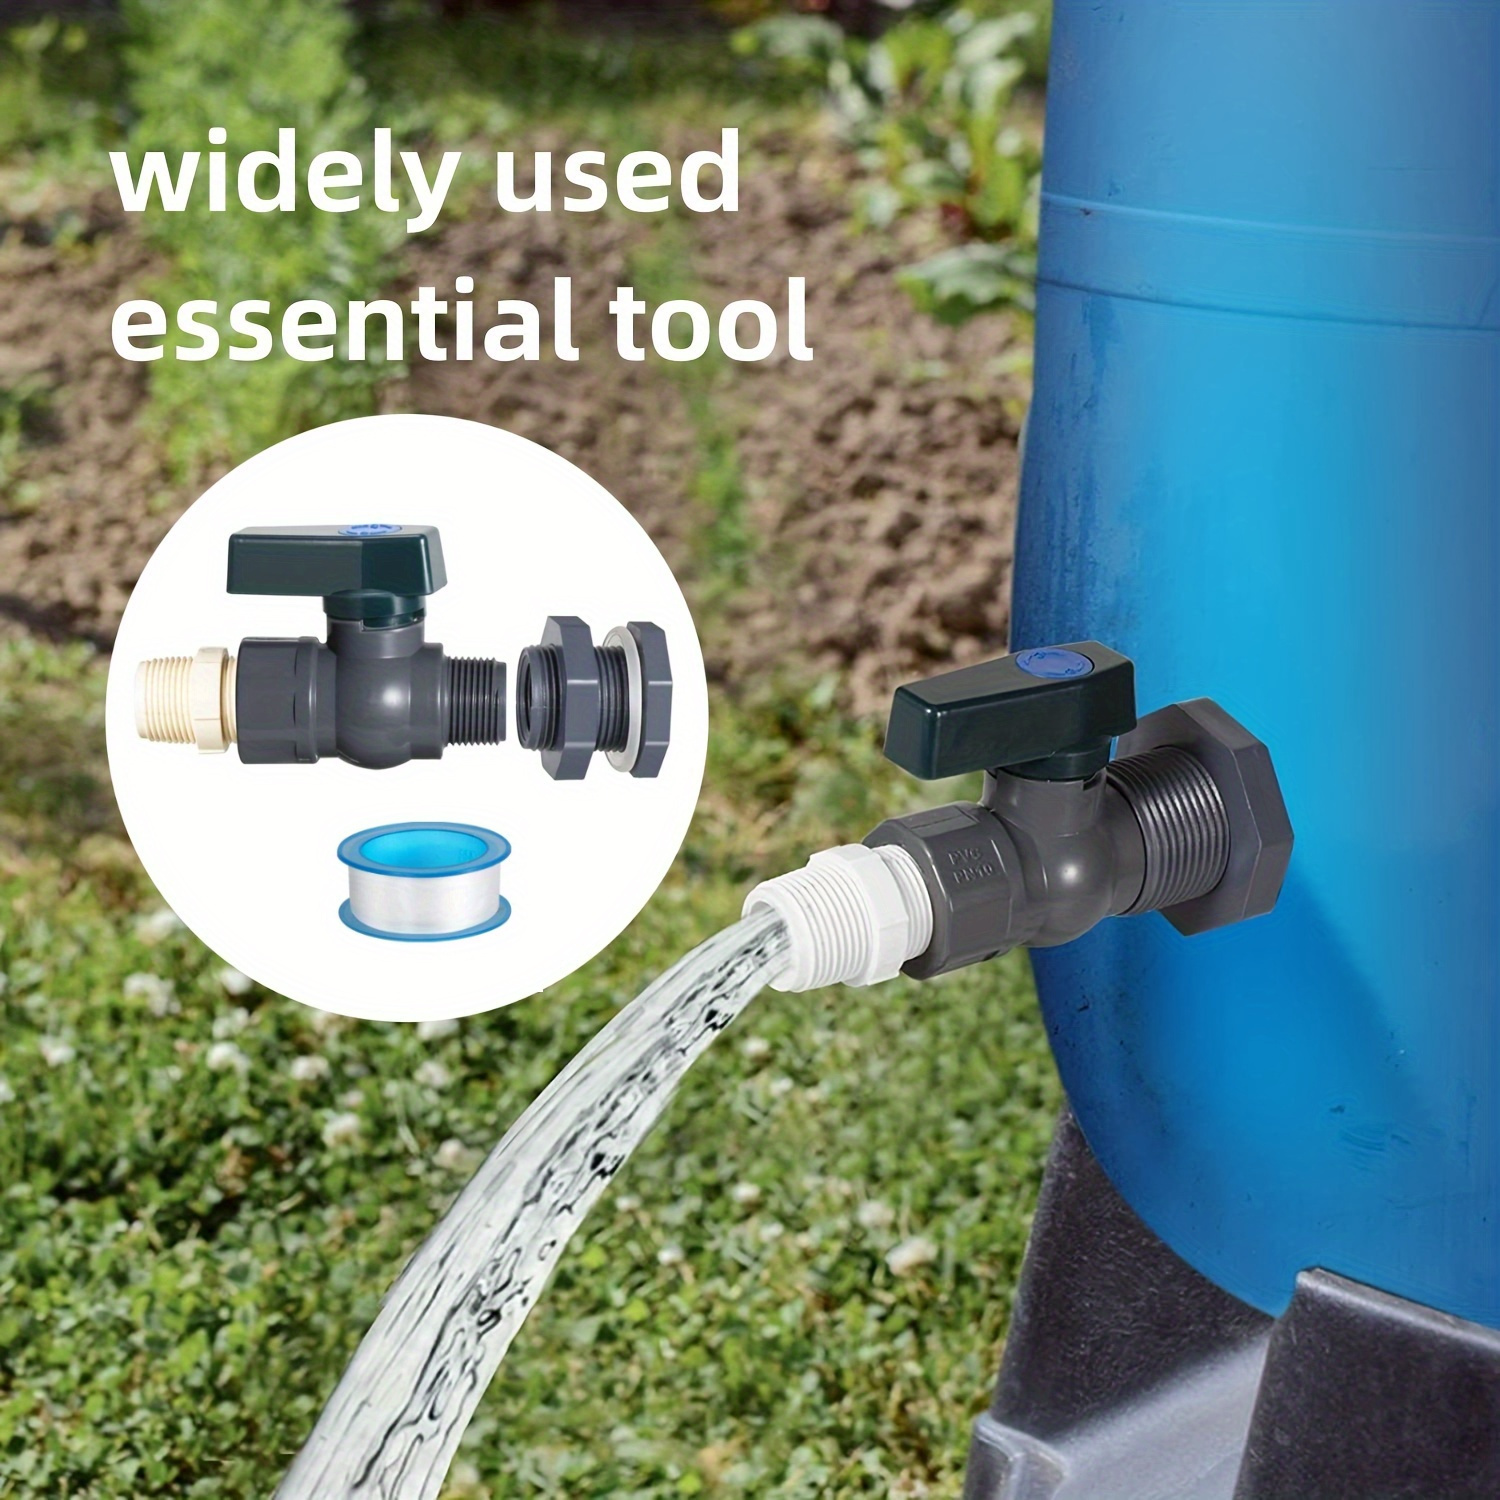 

Durable Pvc Spigot Kit For Rain Barrels - Rust-resistant, Fit With Easy Installation, Wall-mounted Design For Effortless Garden Watering